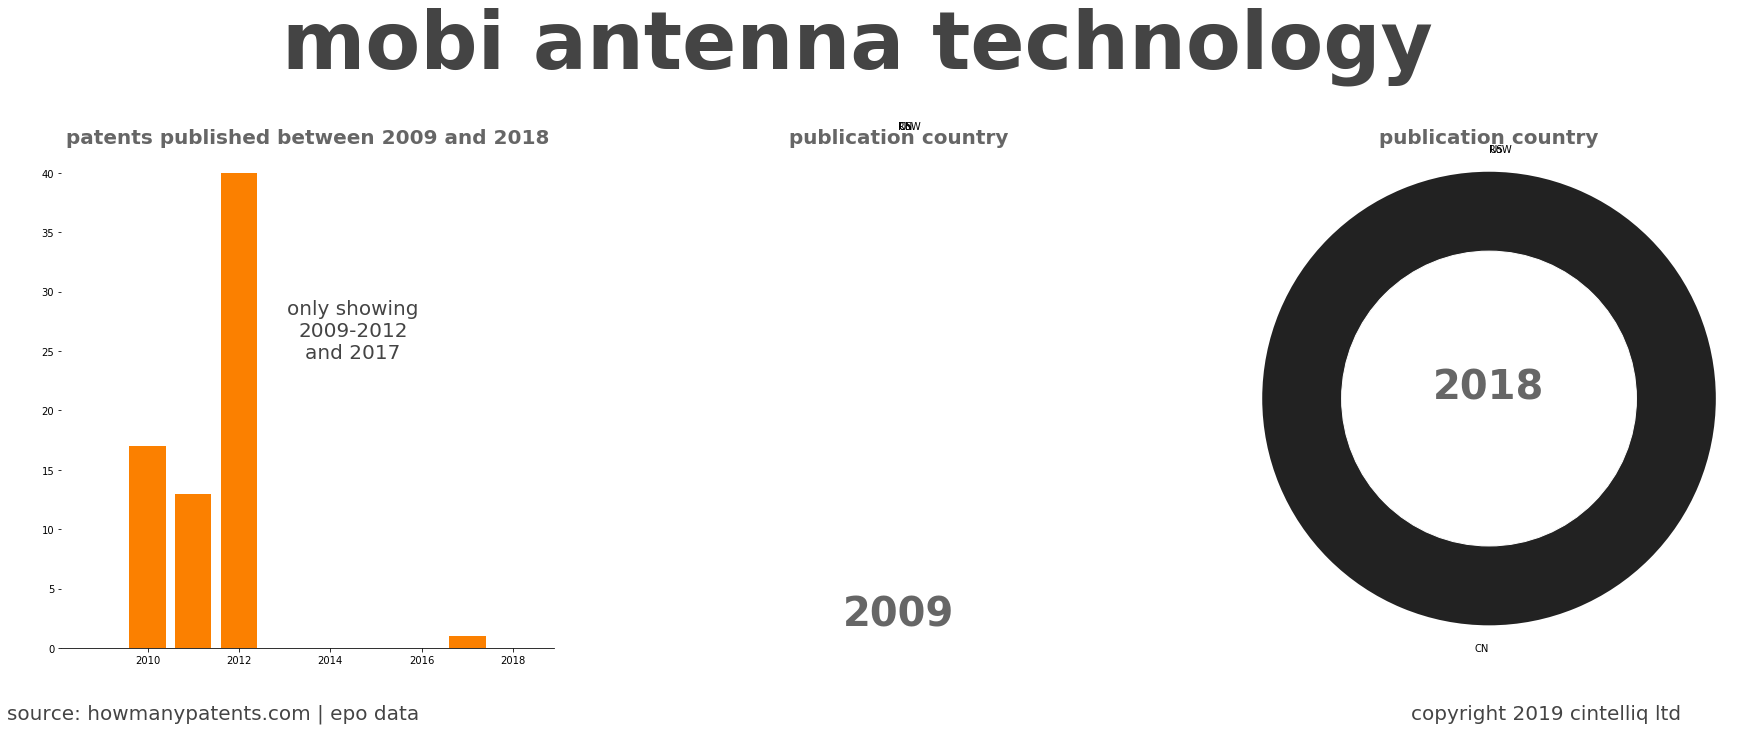 summary of patents for Mobi Antenna Technology 